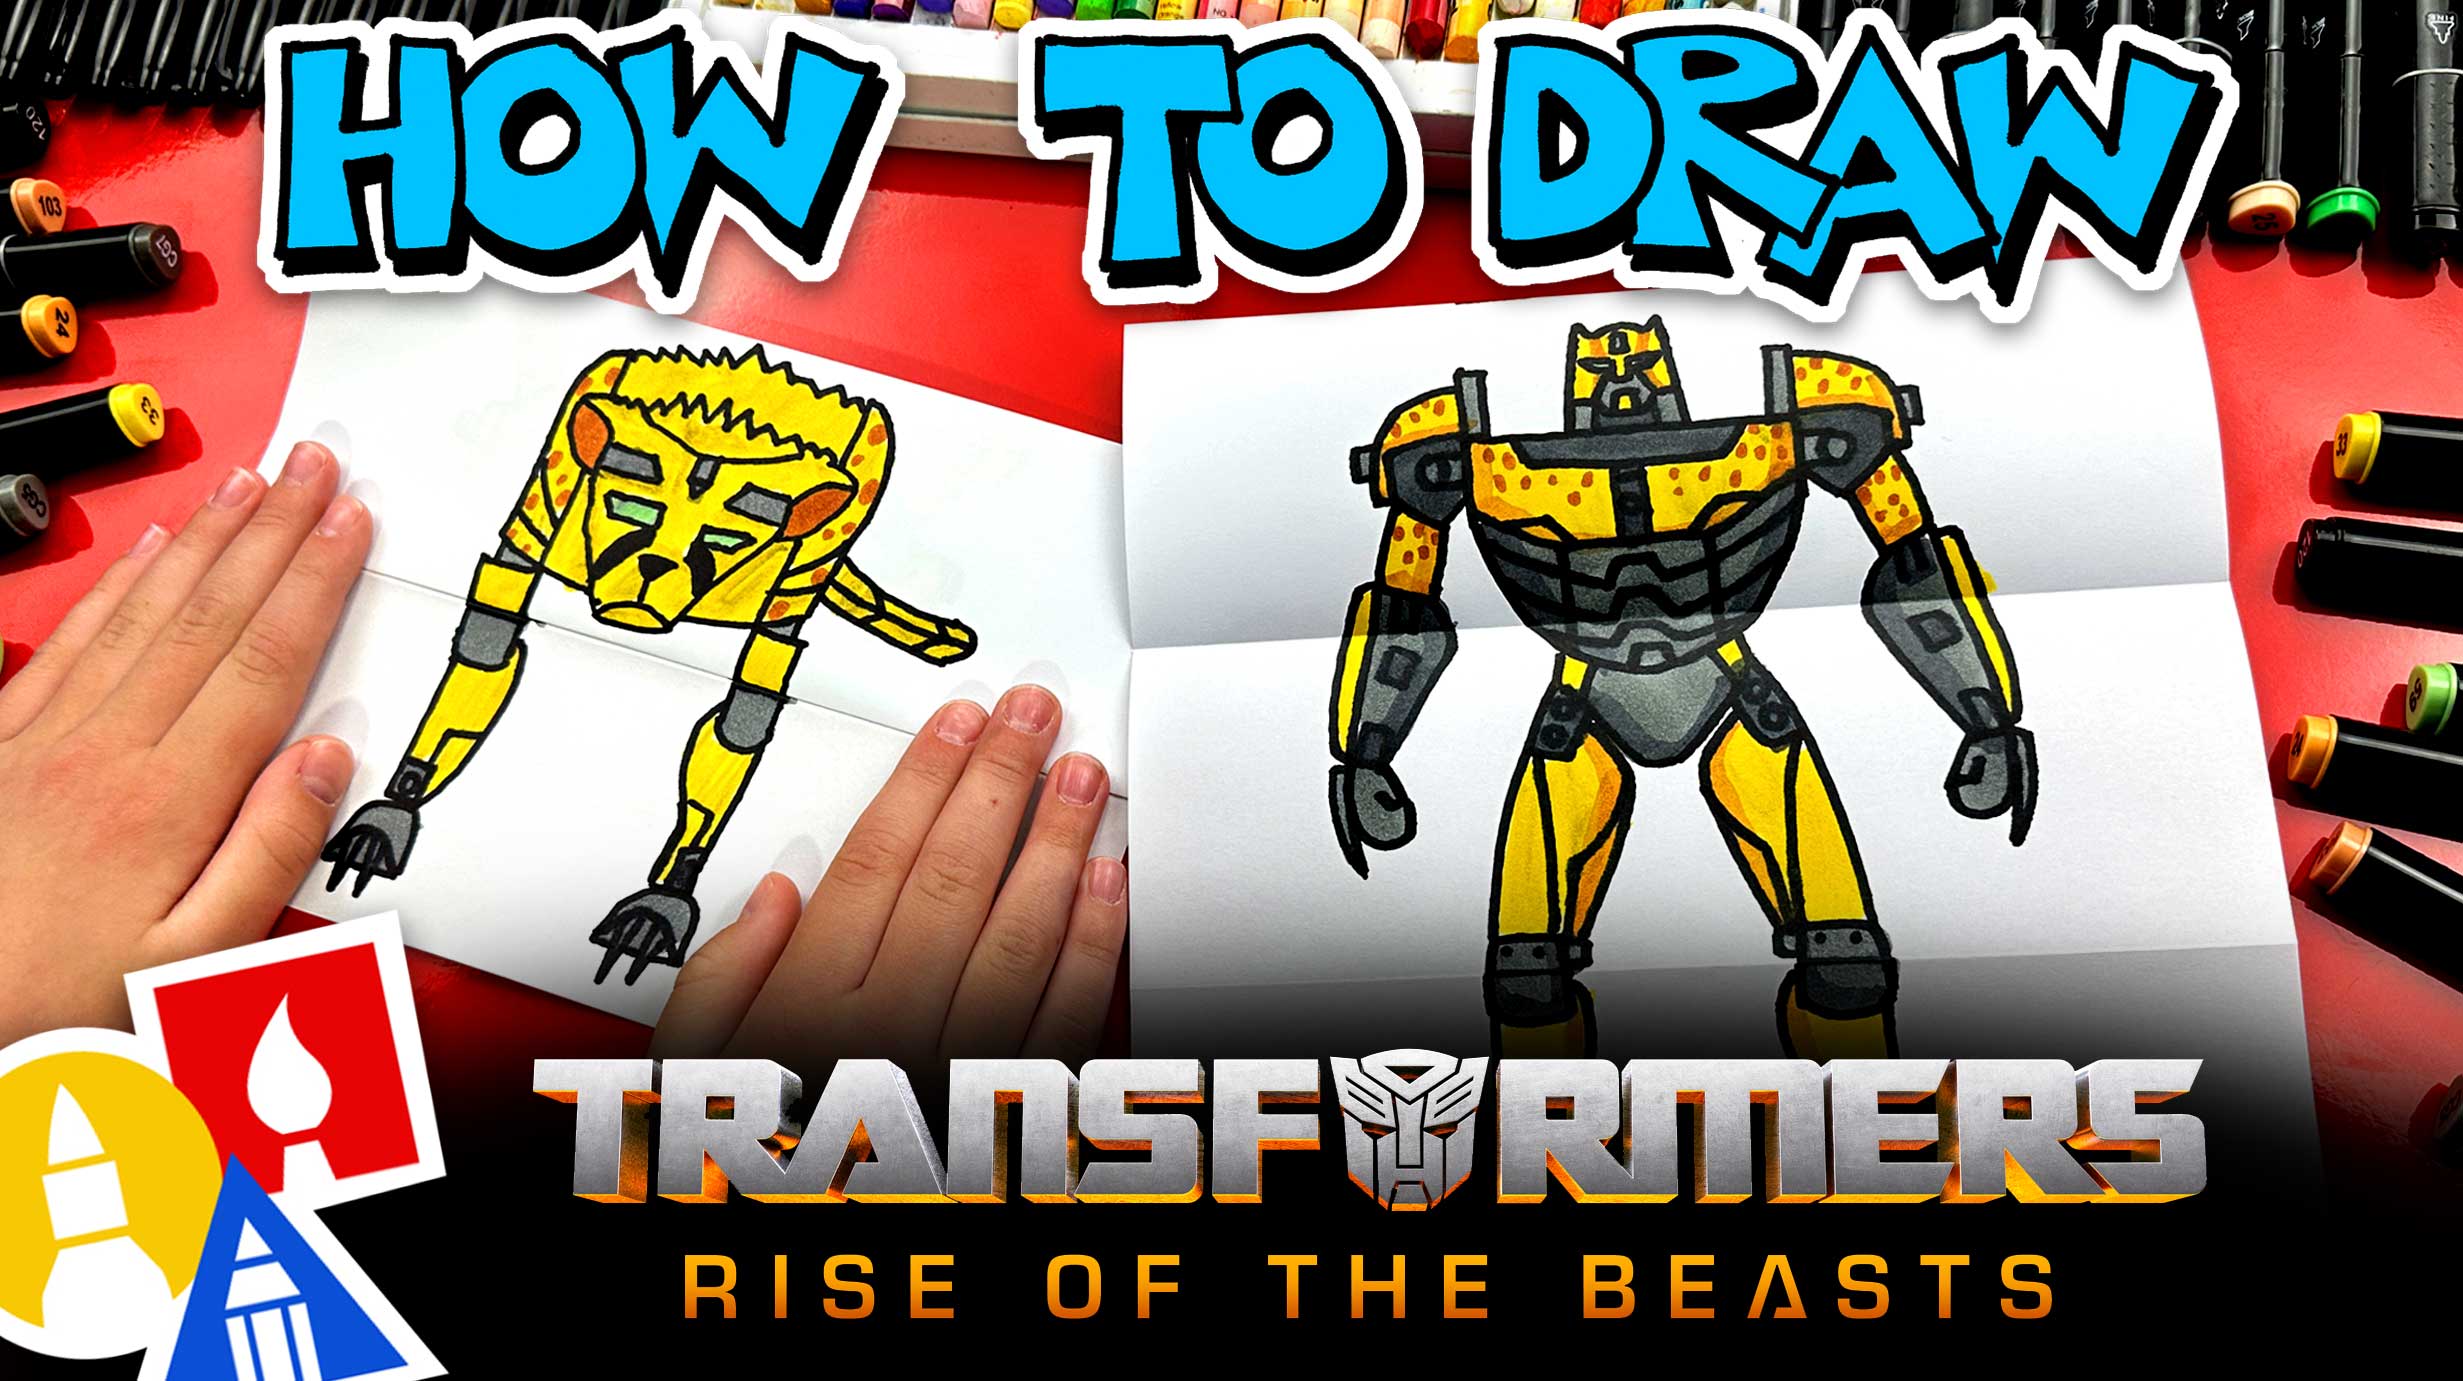 How To Draw Cheetor From Transformers Rise Of The Beasts Movie Art